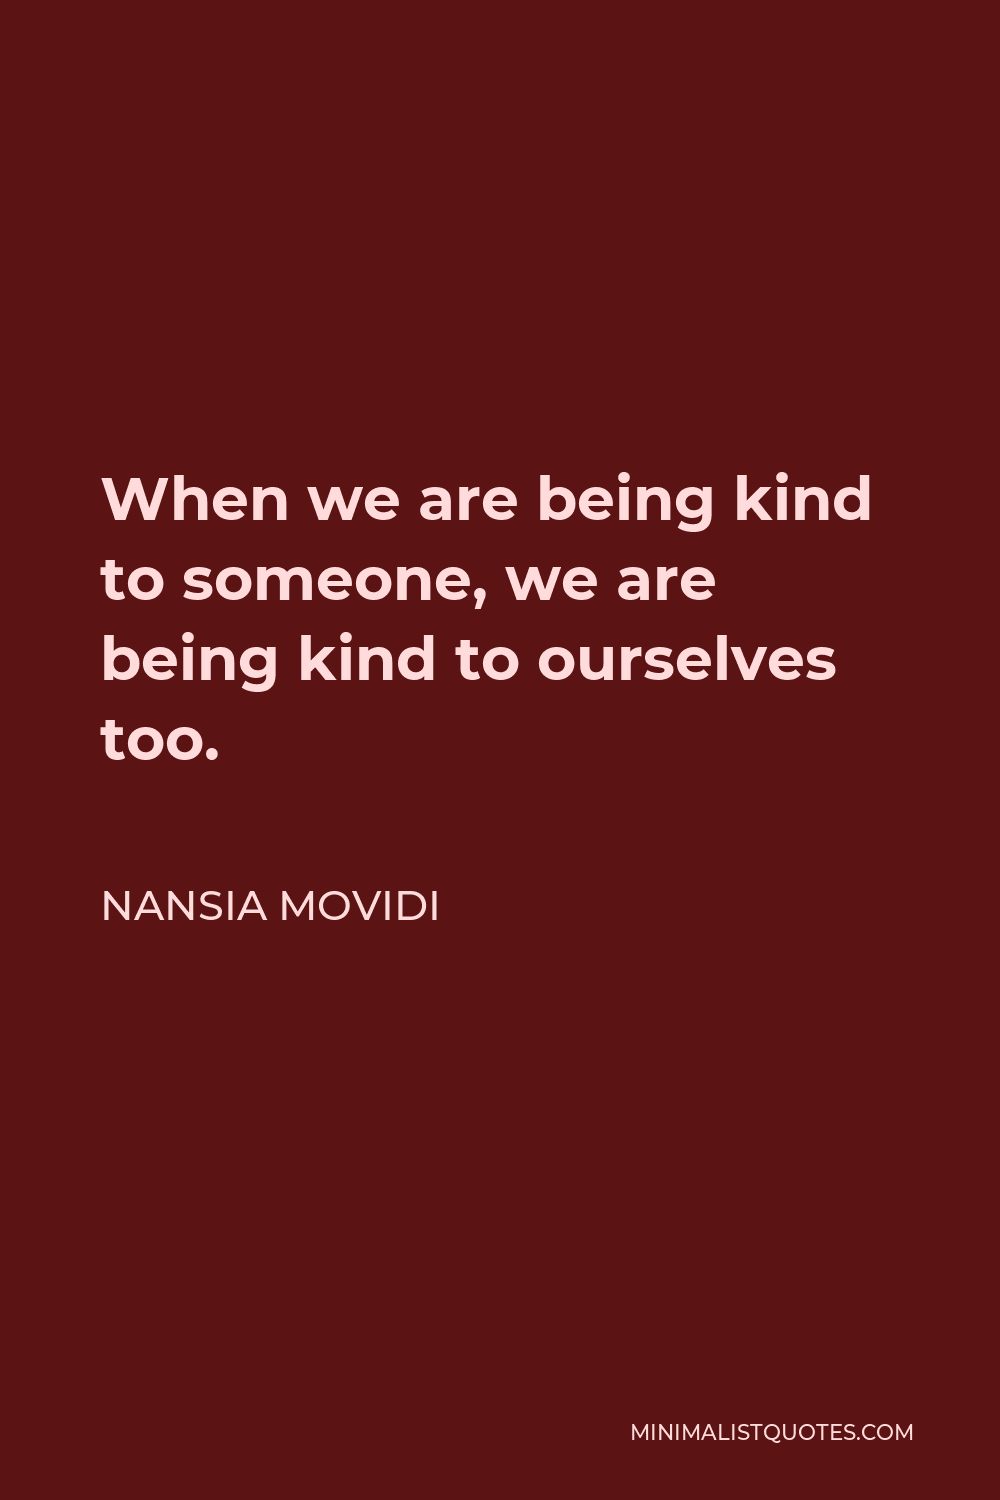 Nansia Movidi Quote - When we are being kind to someone, we are being kind to ourselves too.